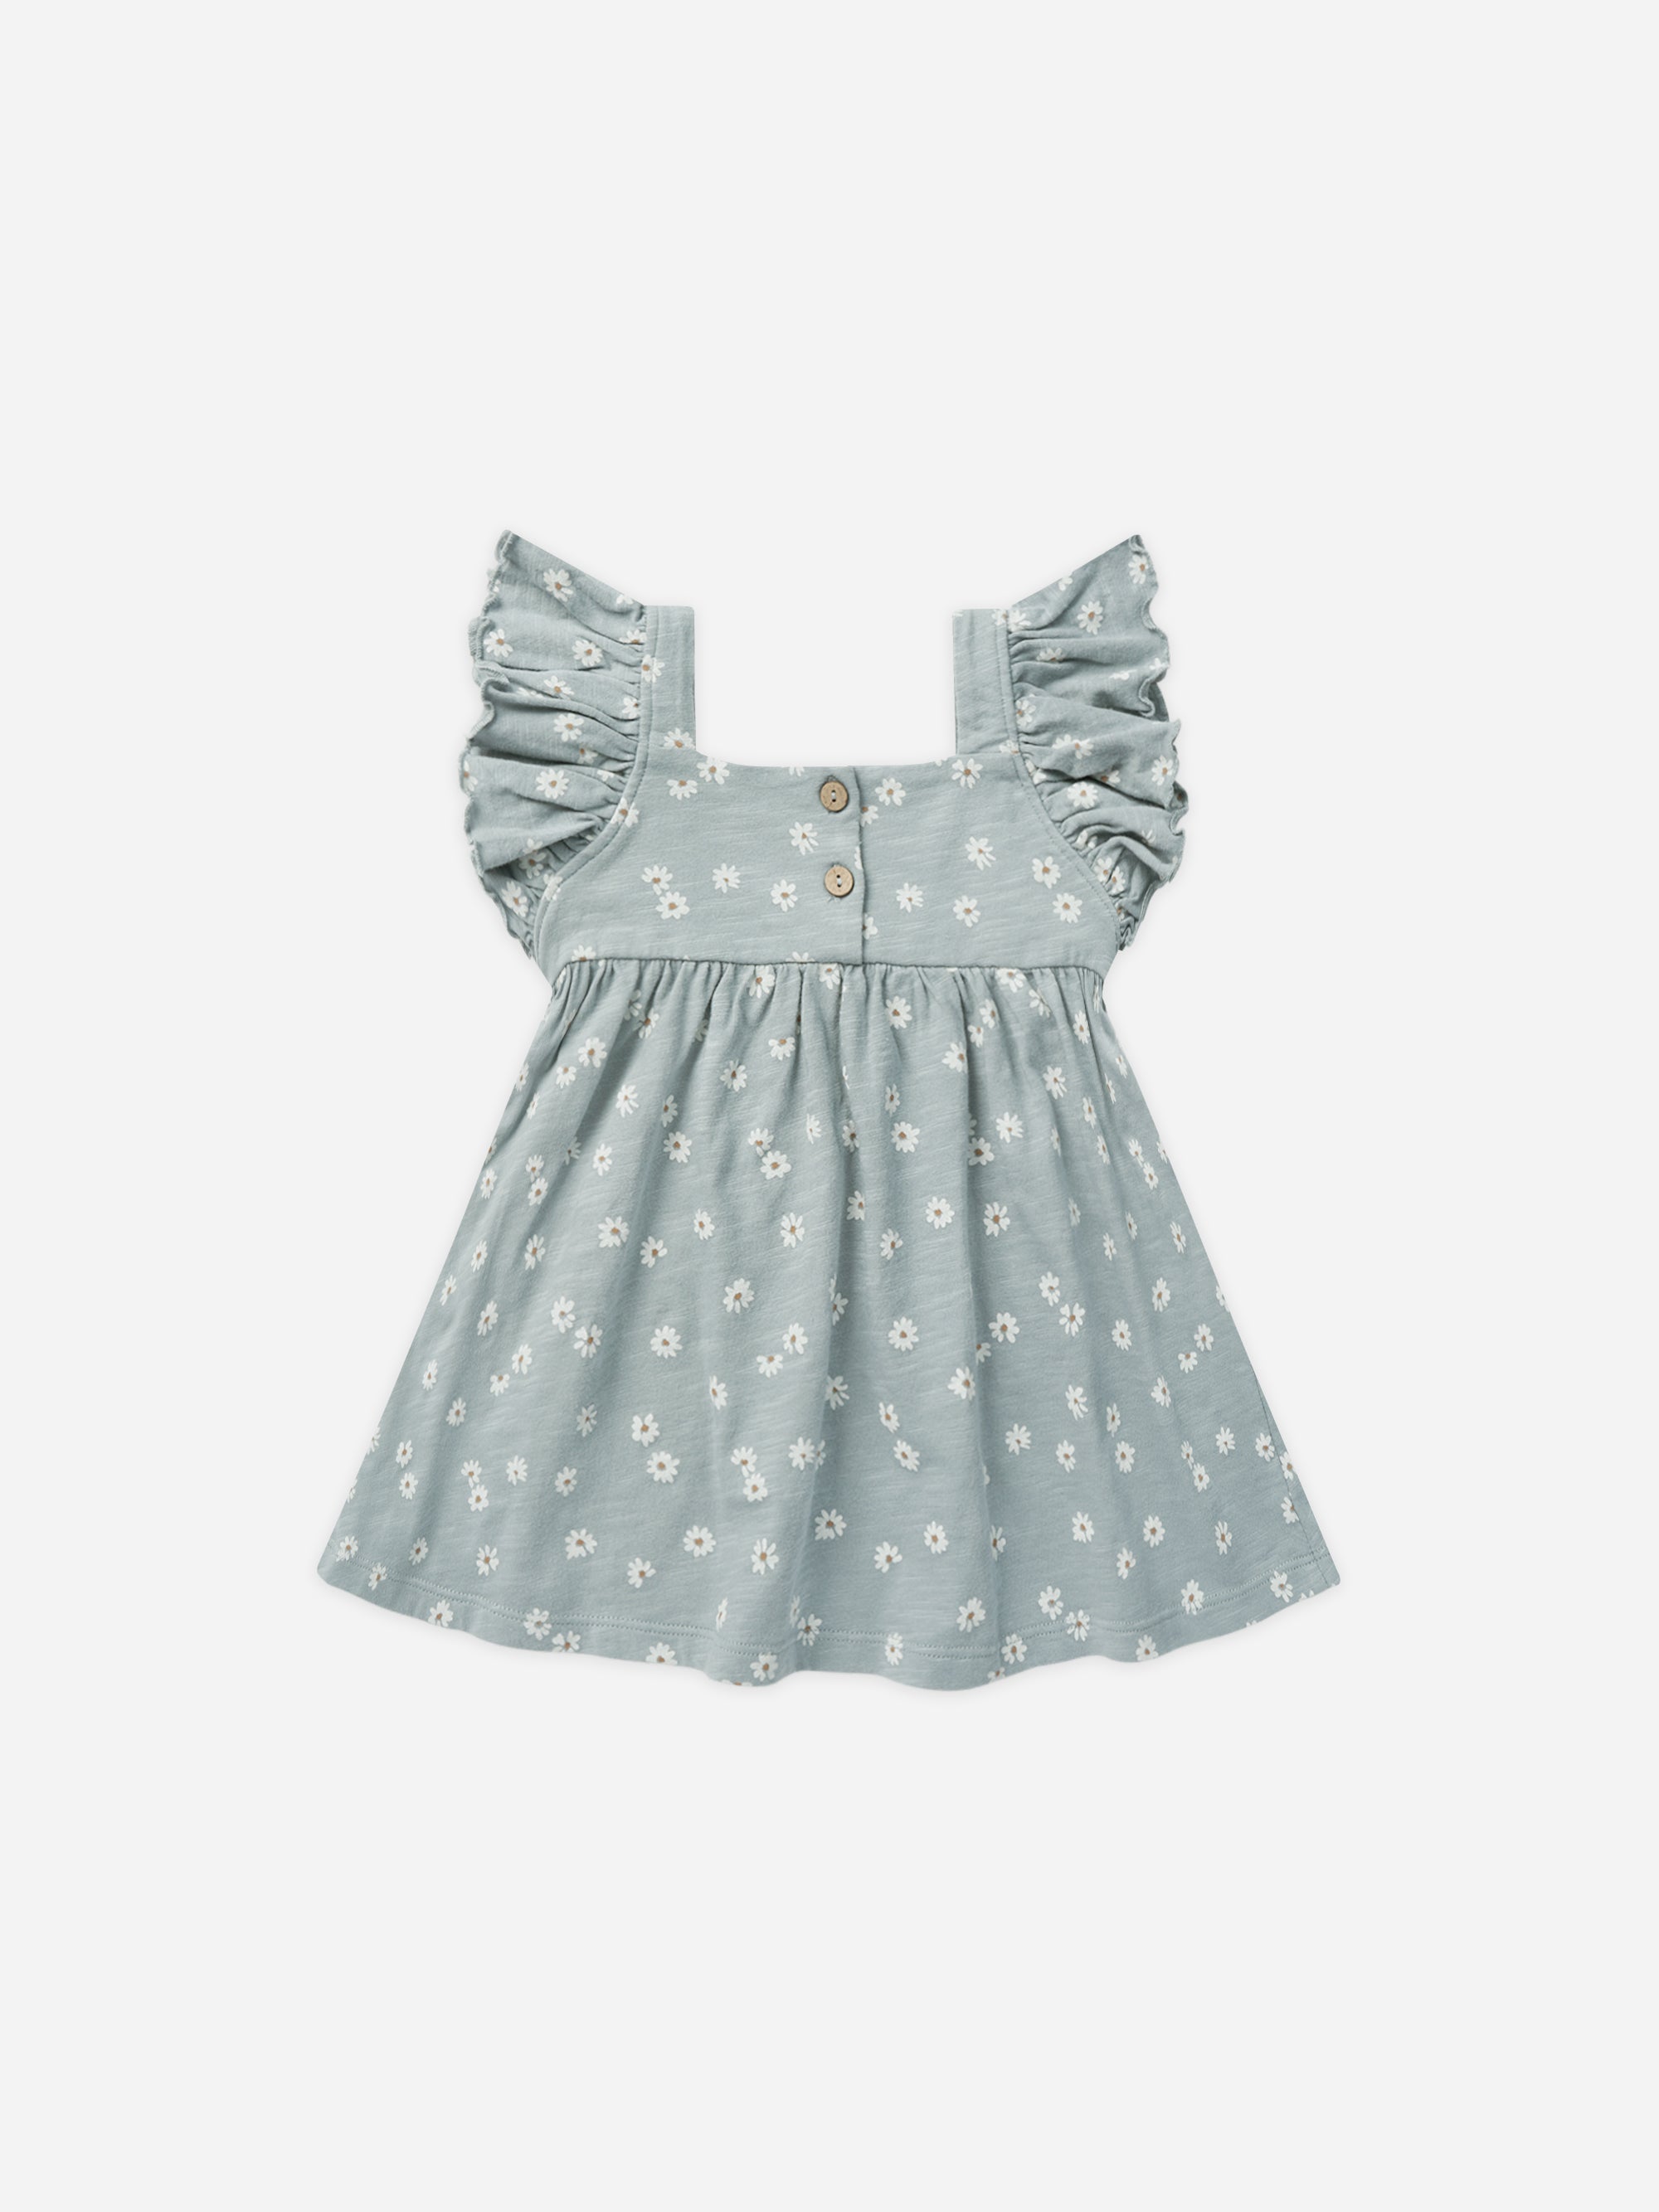 Mariposa Dress || Blue Daisy - Rylee + Cru | Kids Clothes | Trendy Baby Clothes | Modern Infant Outfits |